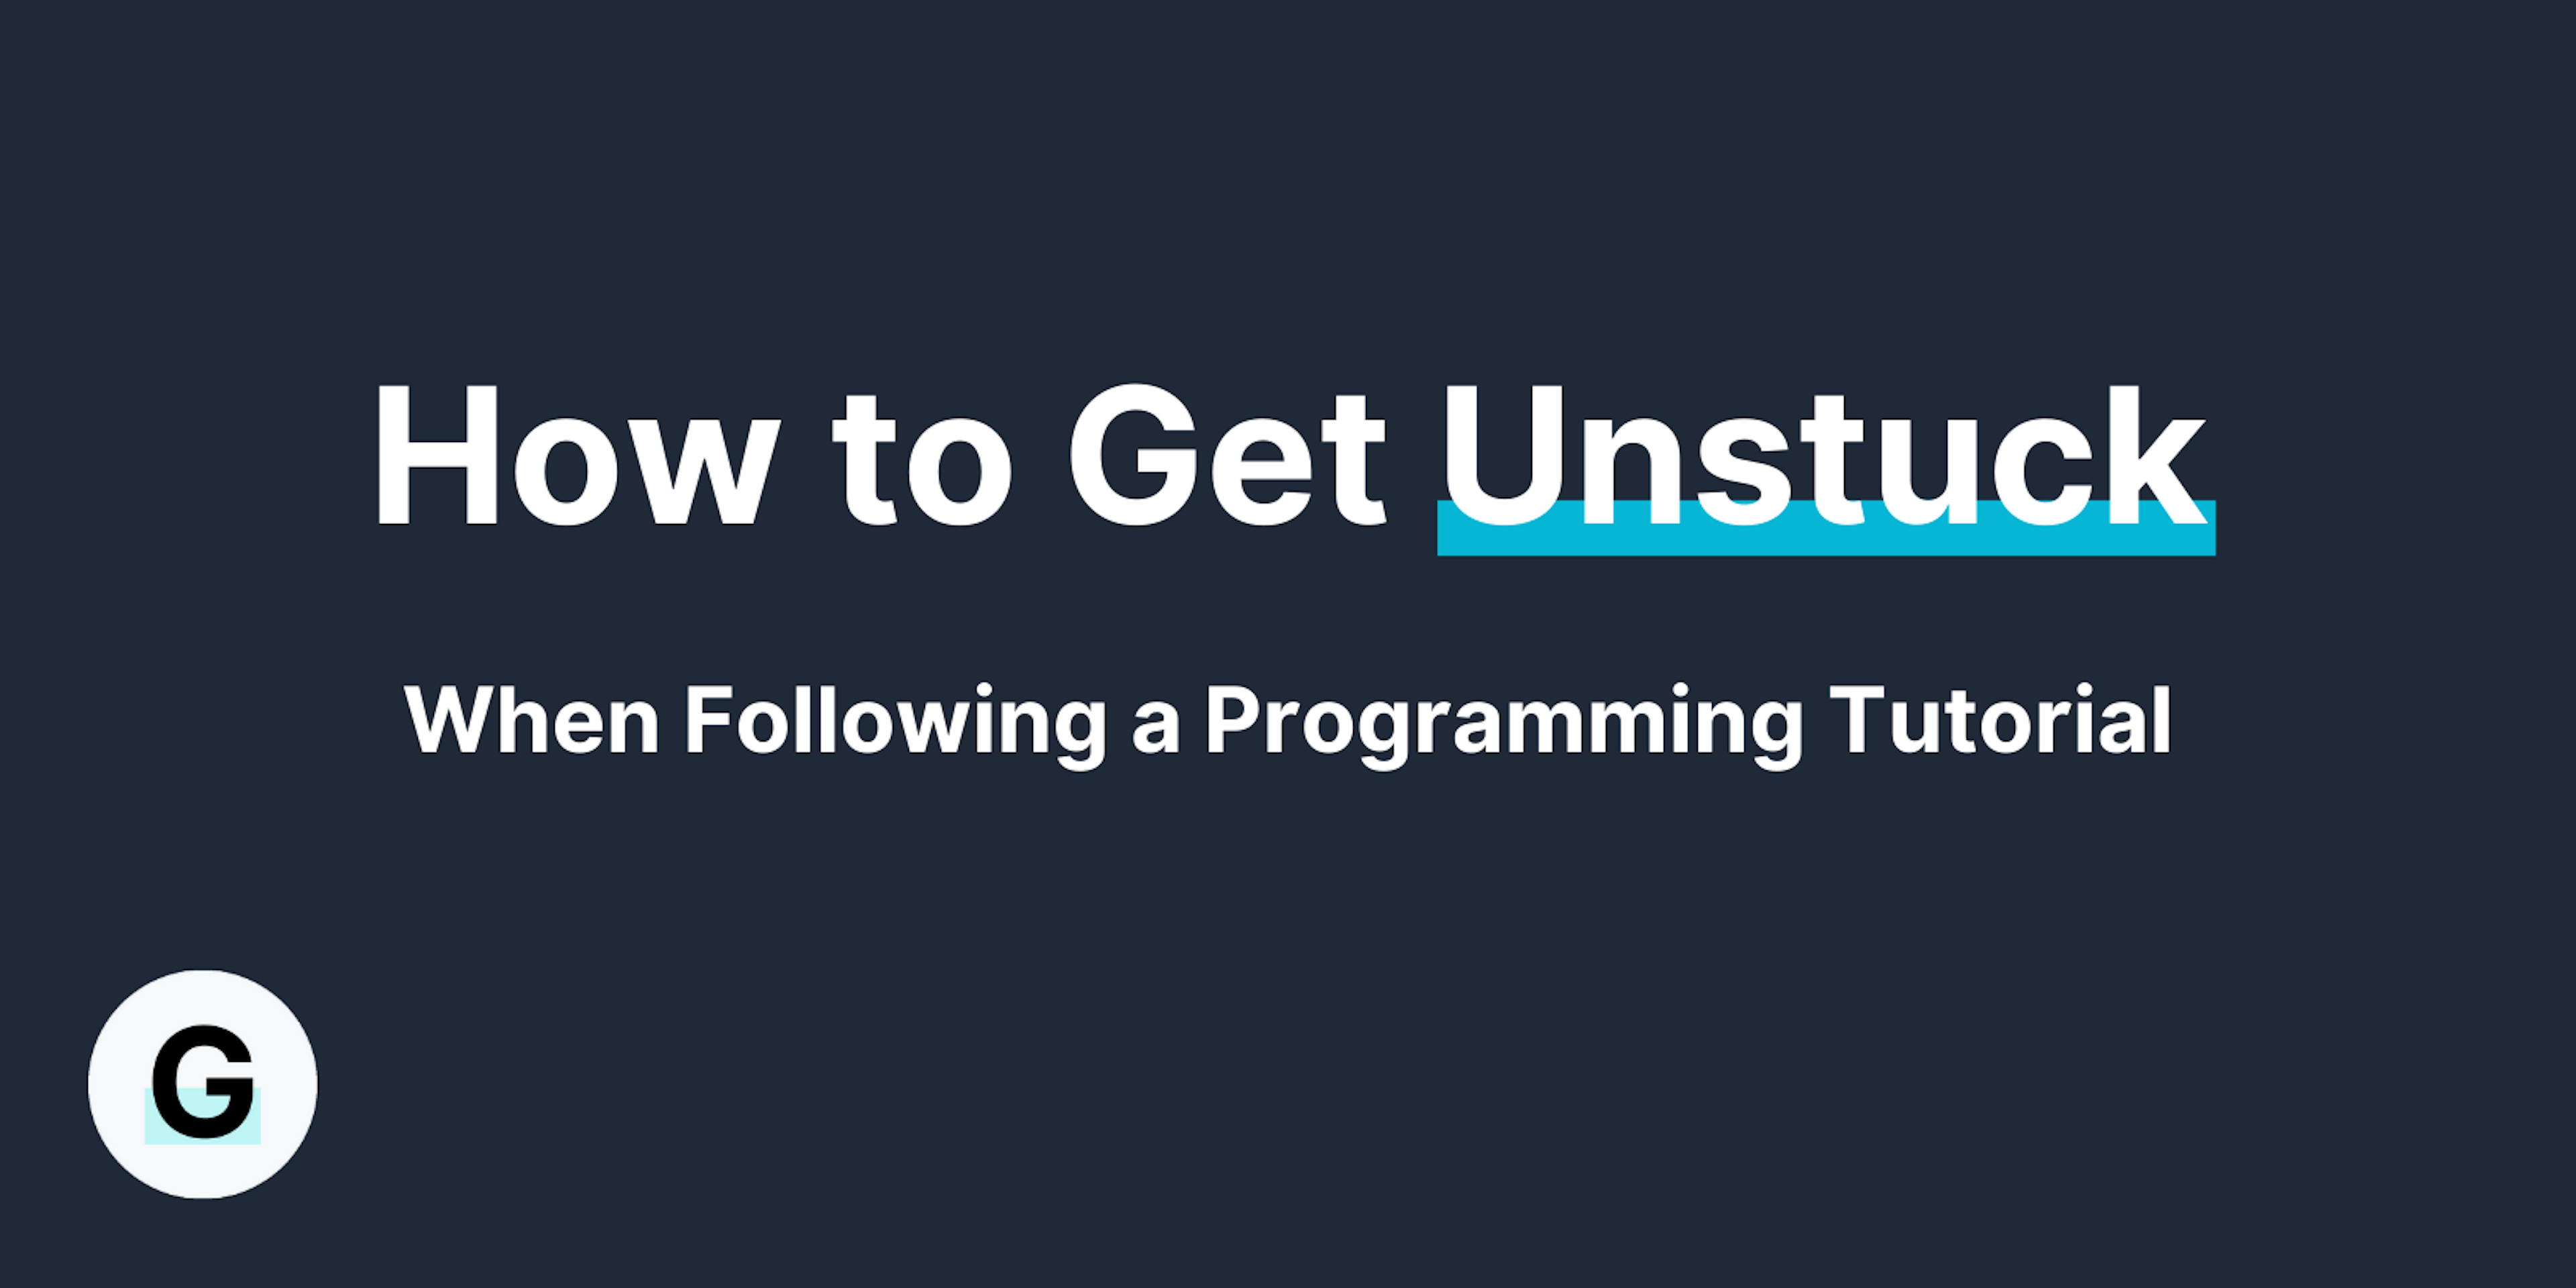 How to Get Unstuck When Following a Programming Tutorial